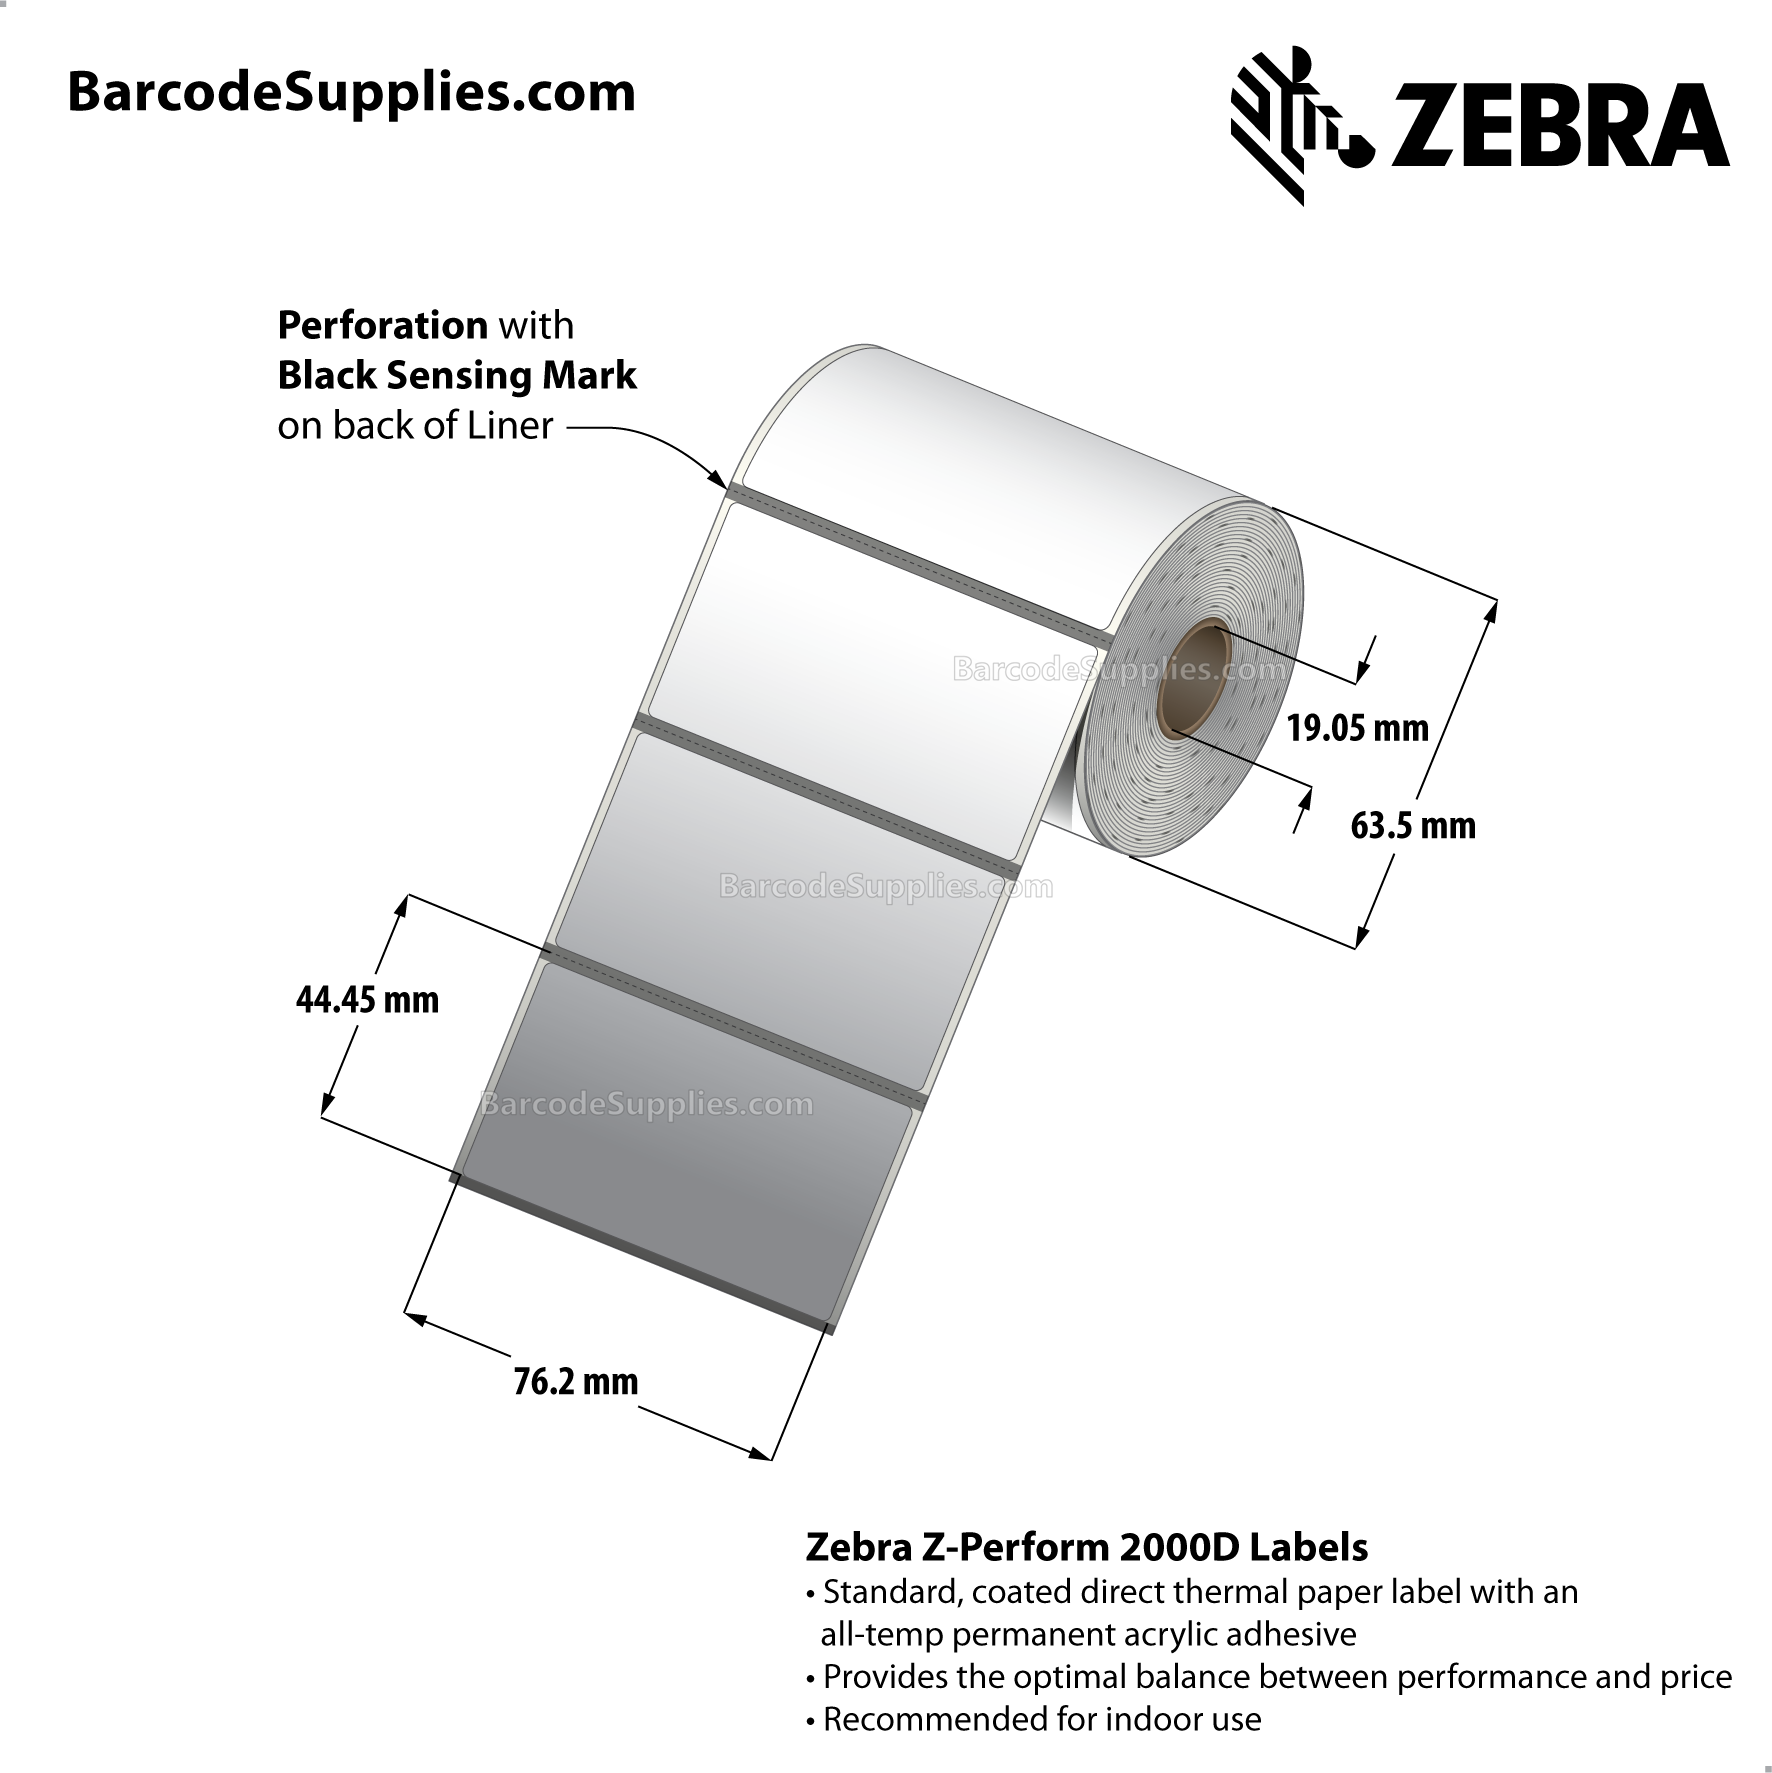 3 x 1.75 Direct Thermal White Z-Perform 2000D Labels With All-Temp Adhesive - Black mark sensing - Perforated - 350 Labels Per Roll - Carton Of 36 Rolls - 12600 Labels Total - MPN: LD-R3AT5F